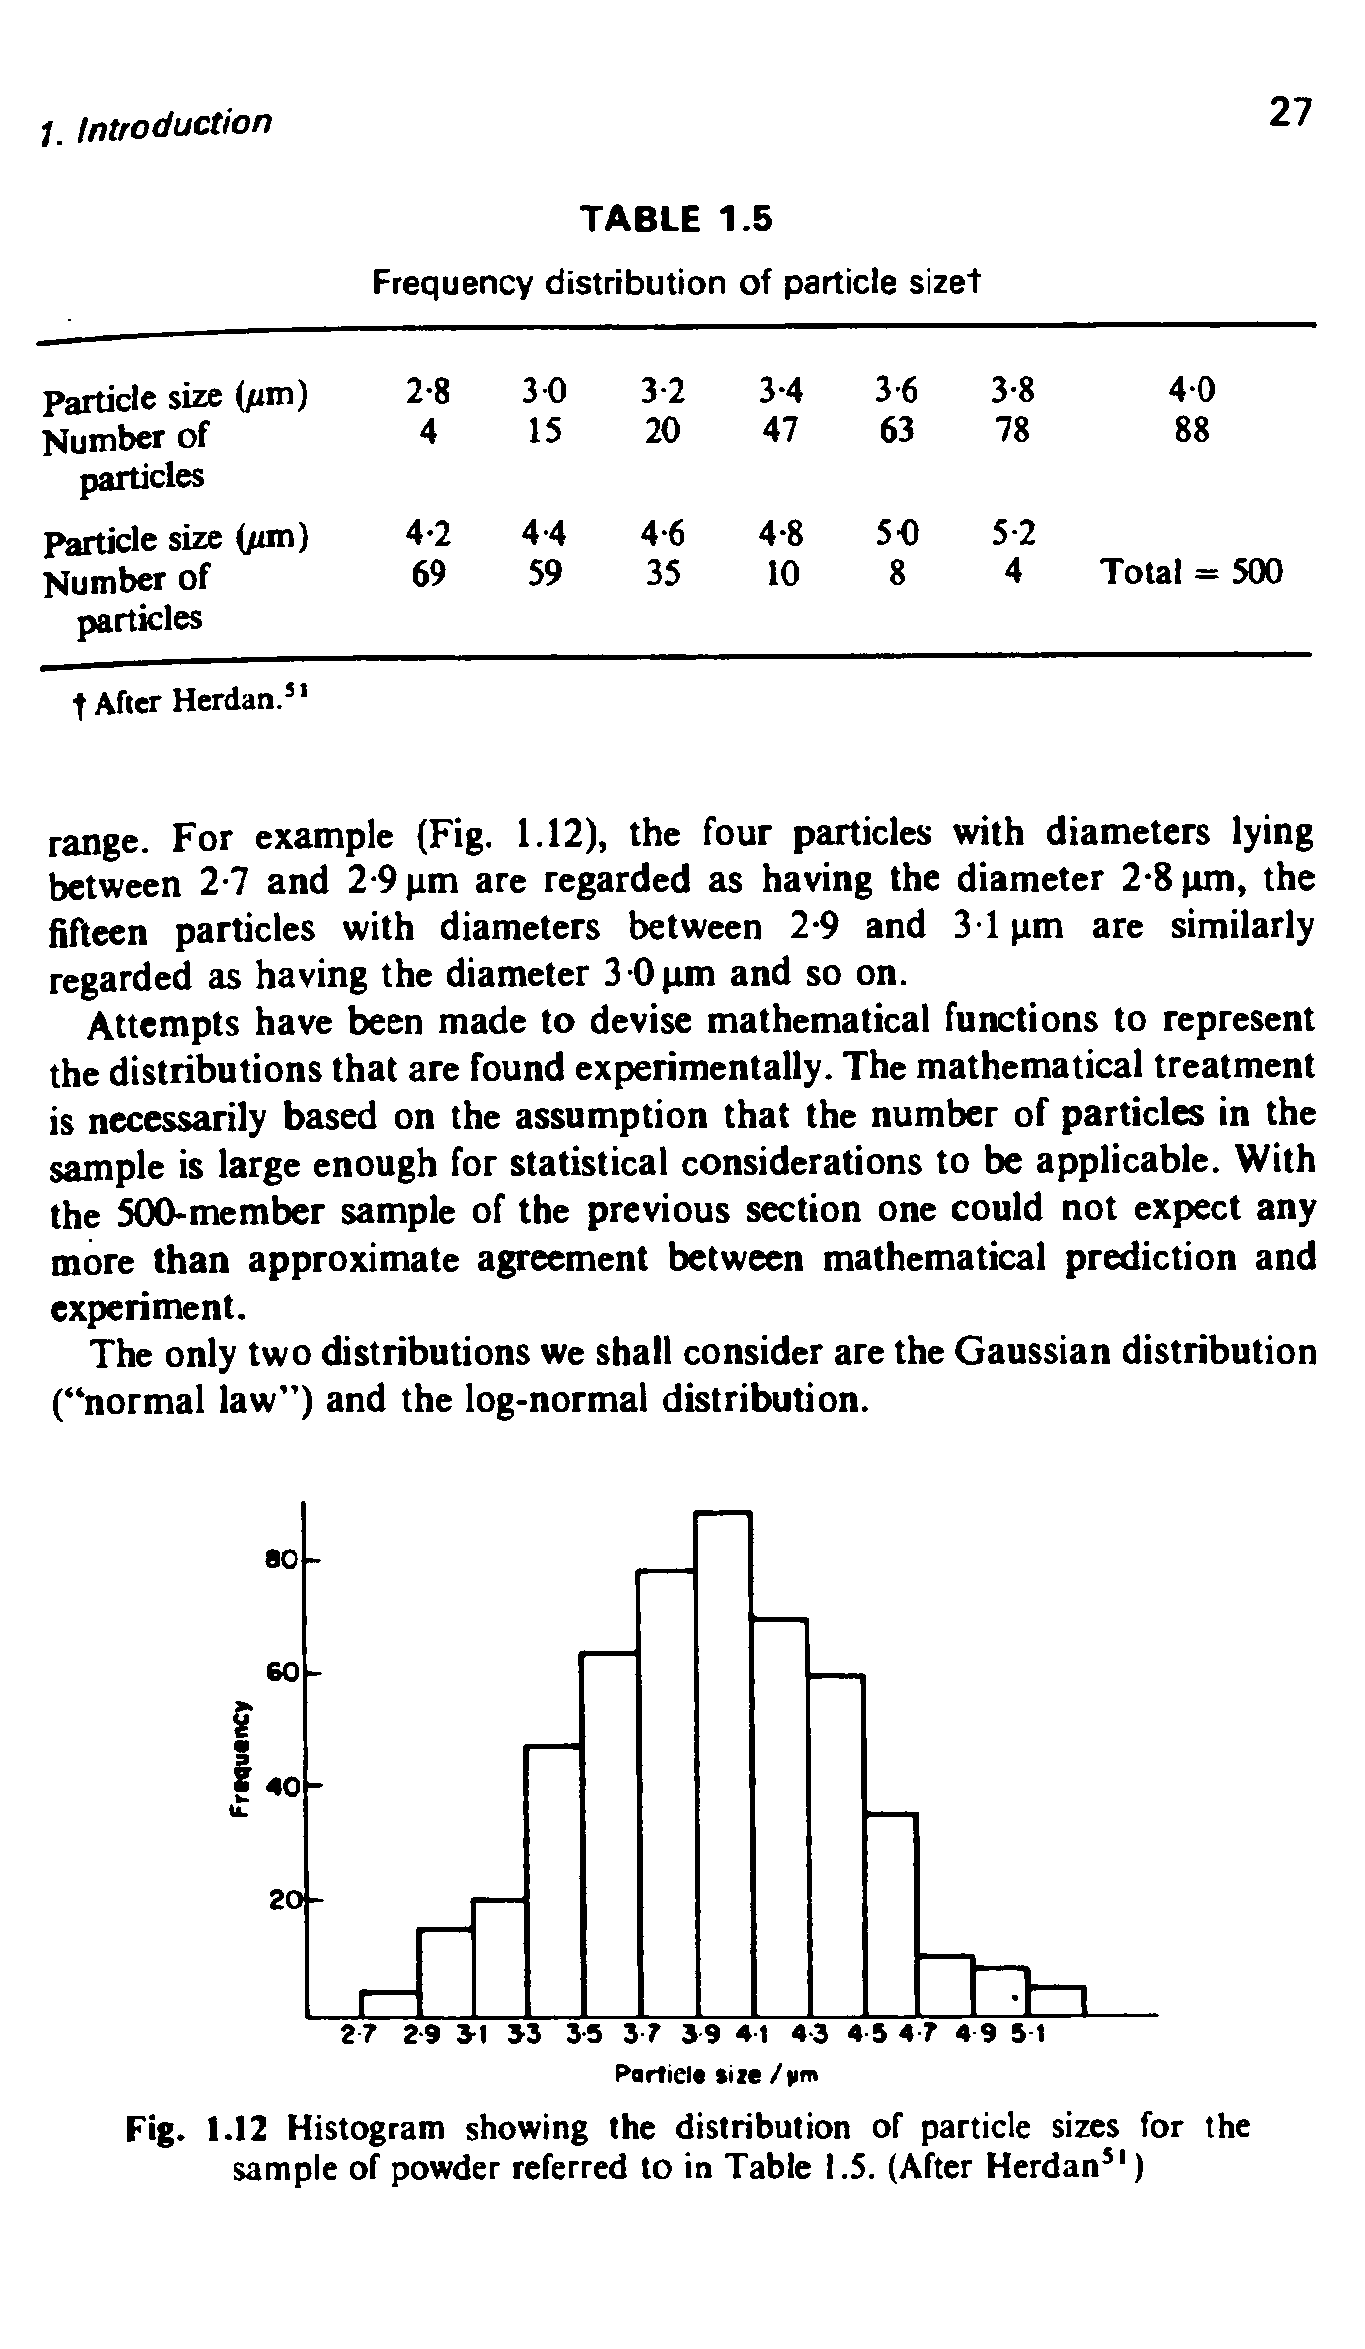 Fig. 1.12 Histogram showing the distribution of particle sizes for the sample of powder referred to in Table 1.5. (After Herdan )...